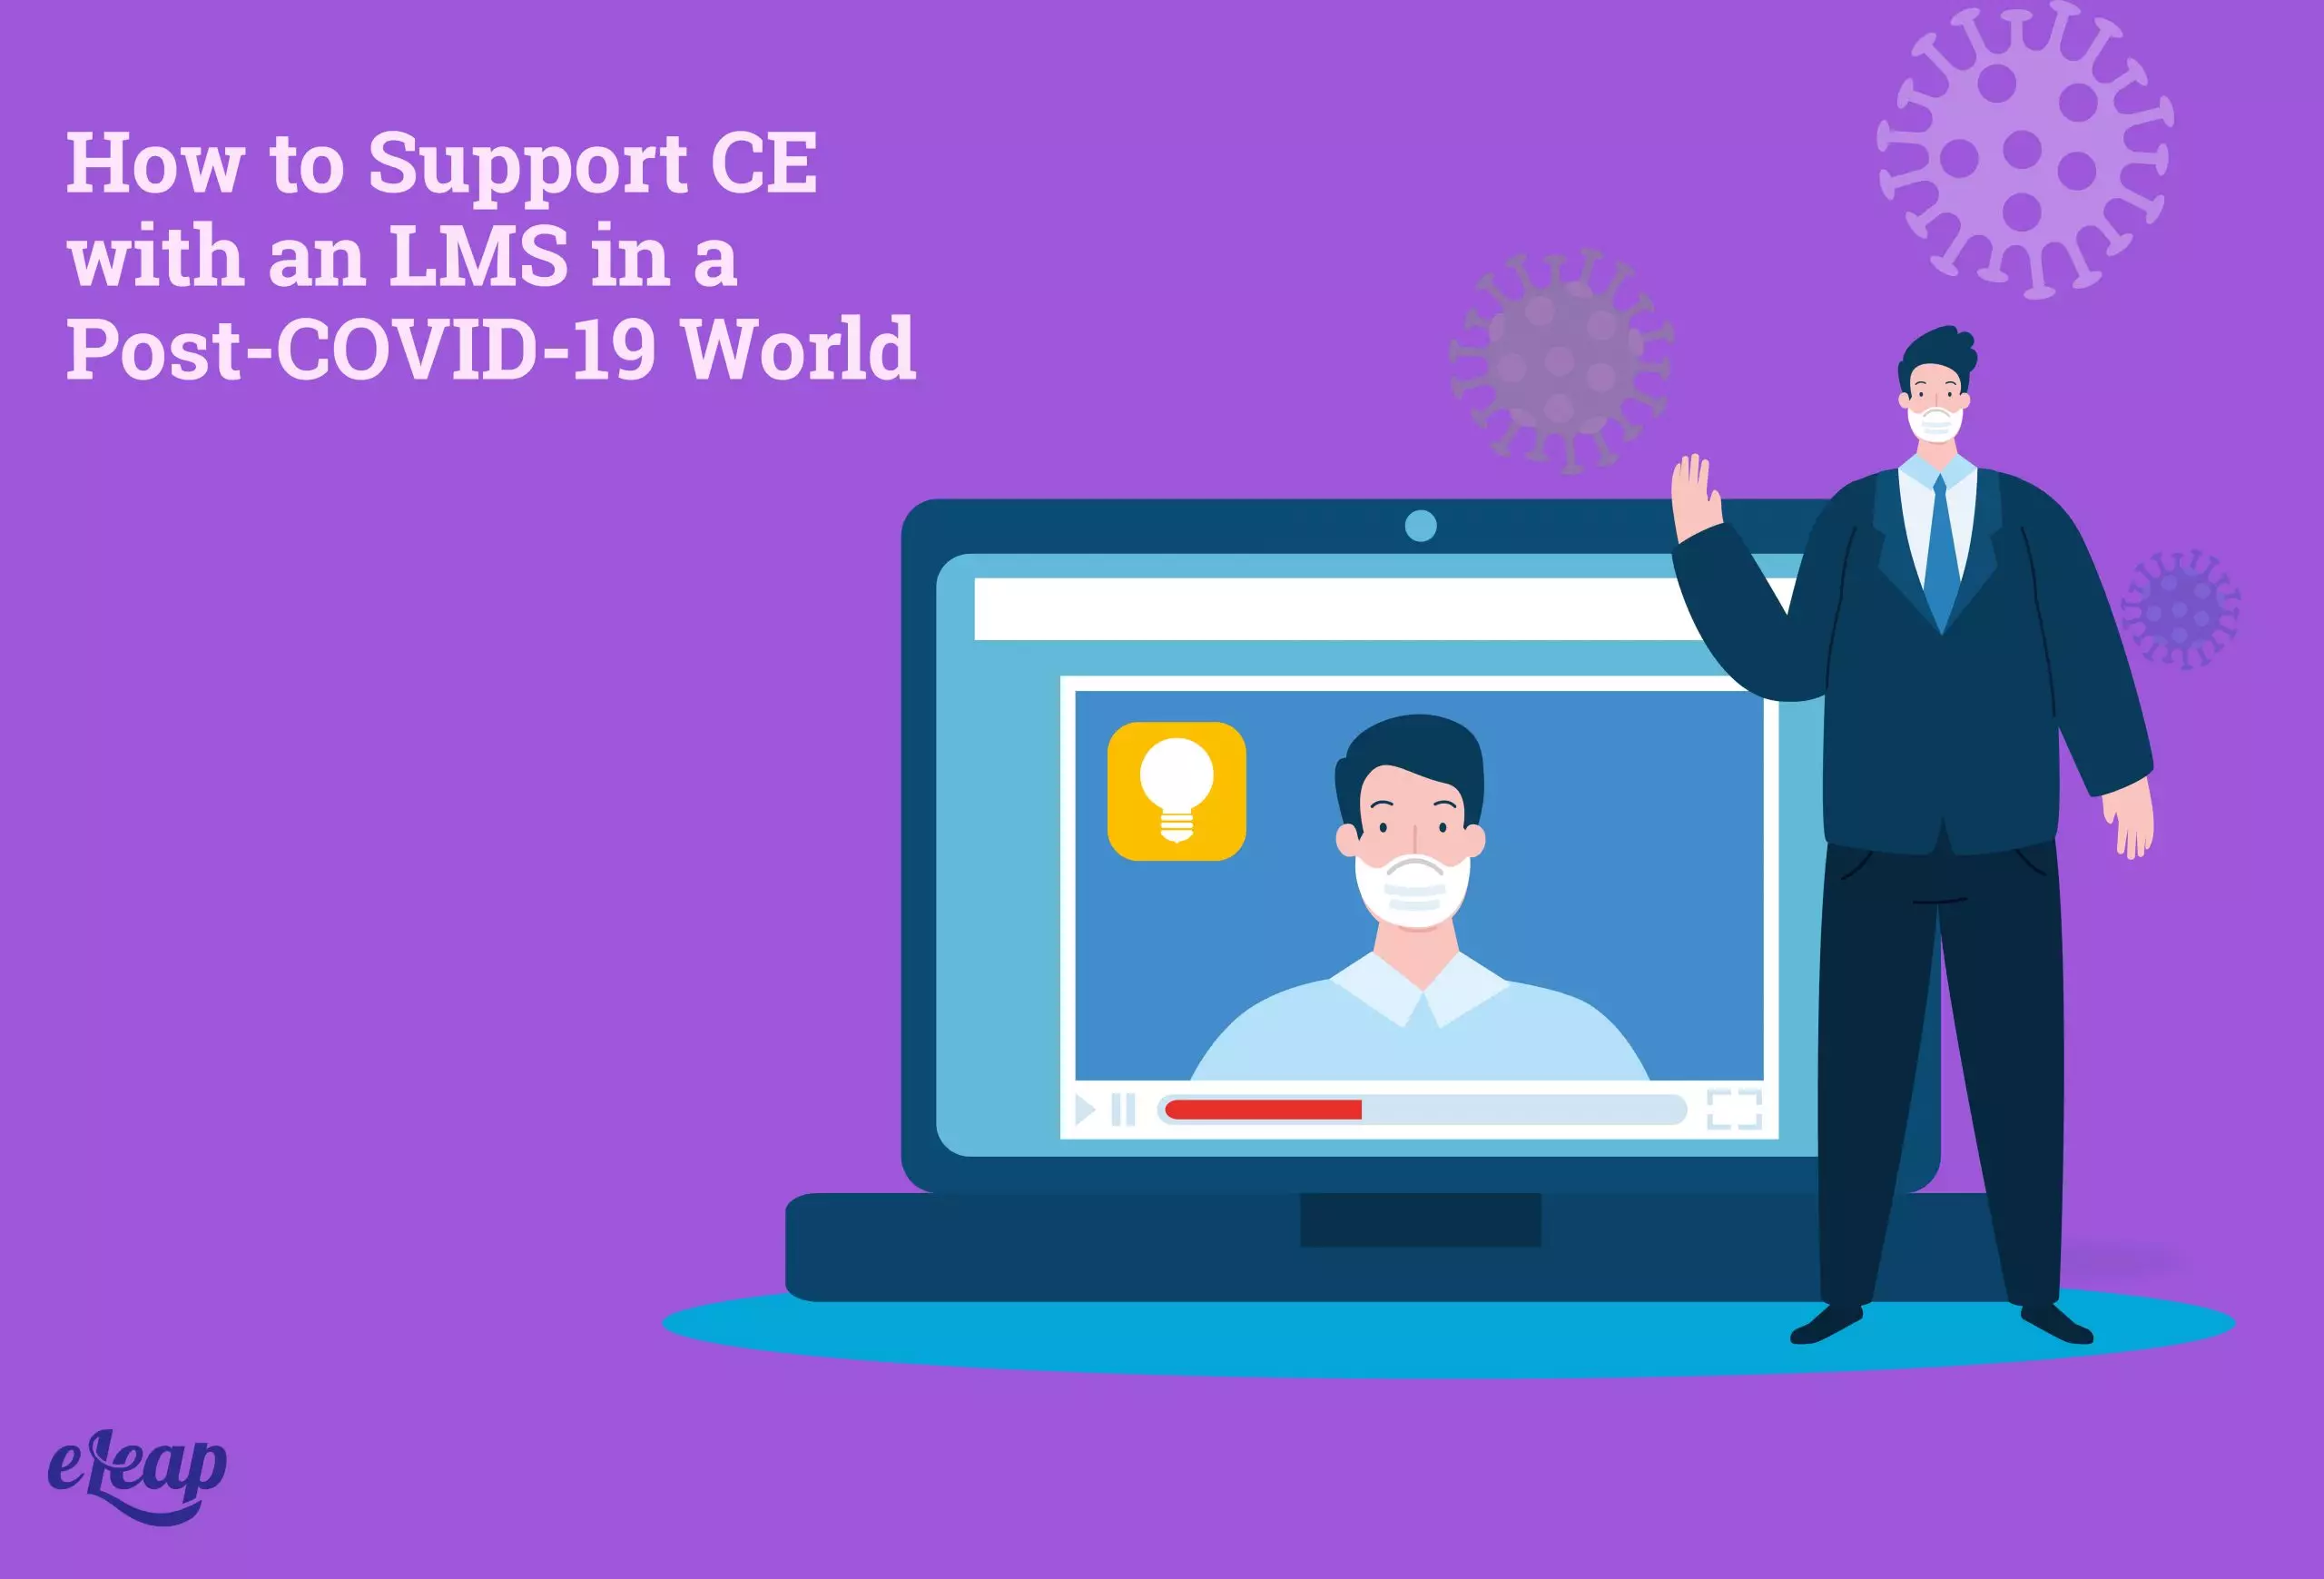 How to Support CE with an LMS in a Post-COVID-19 World